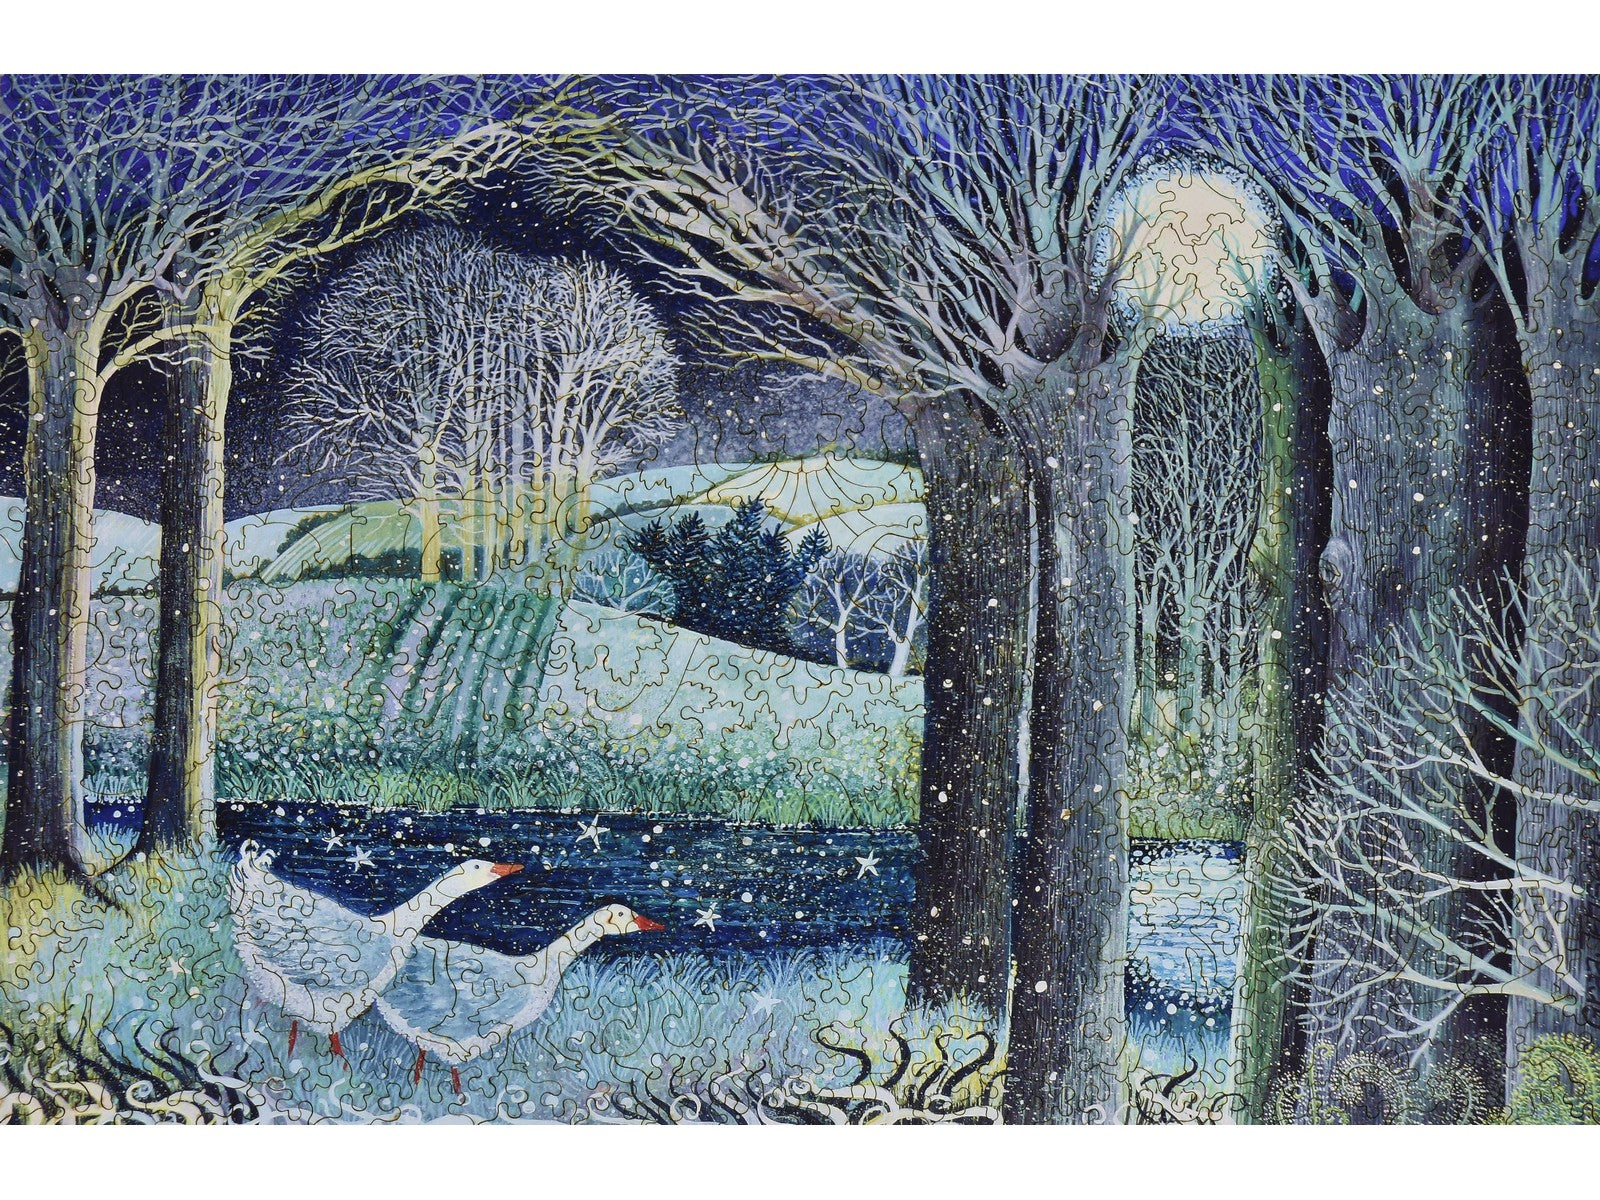 The front of the puzzle, Starry River, with geese by a stream at night in the snowy woods.